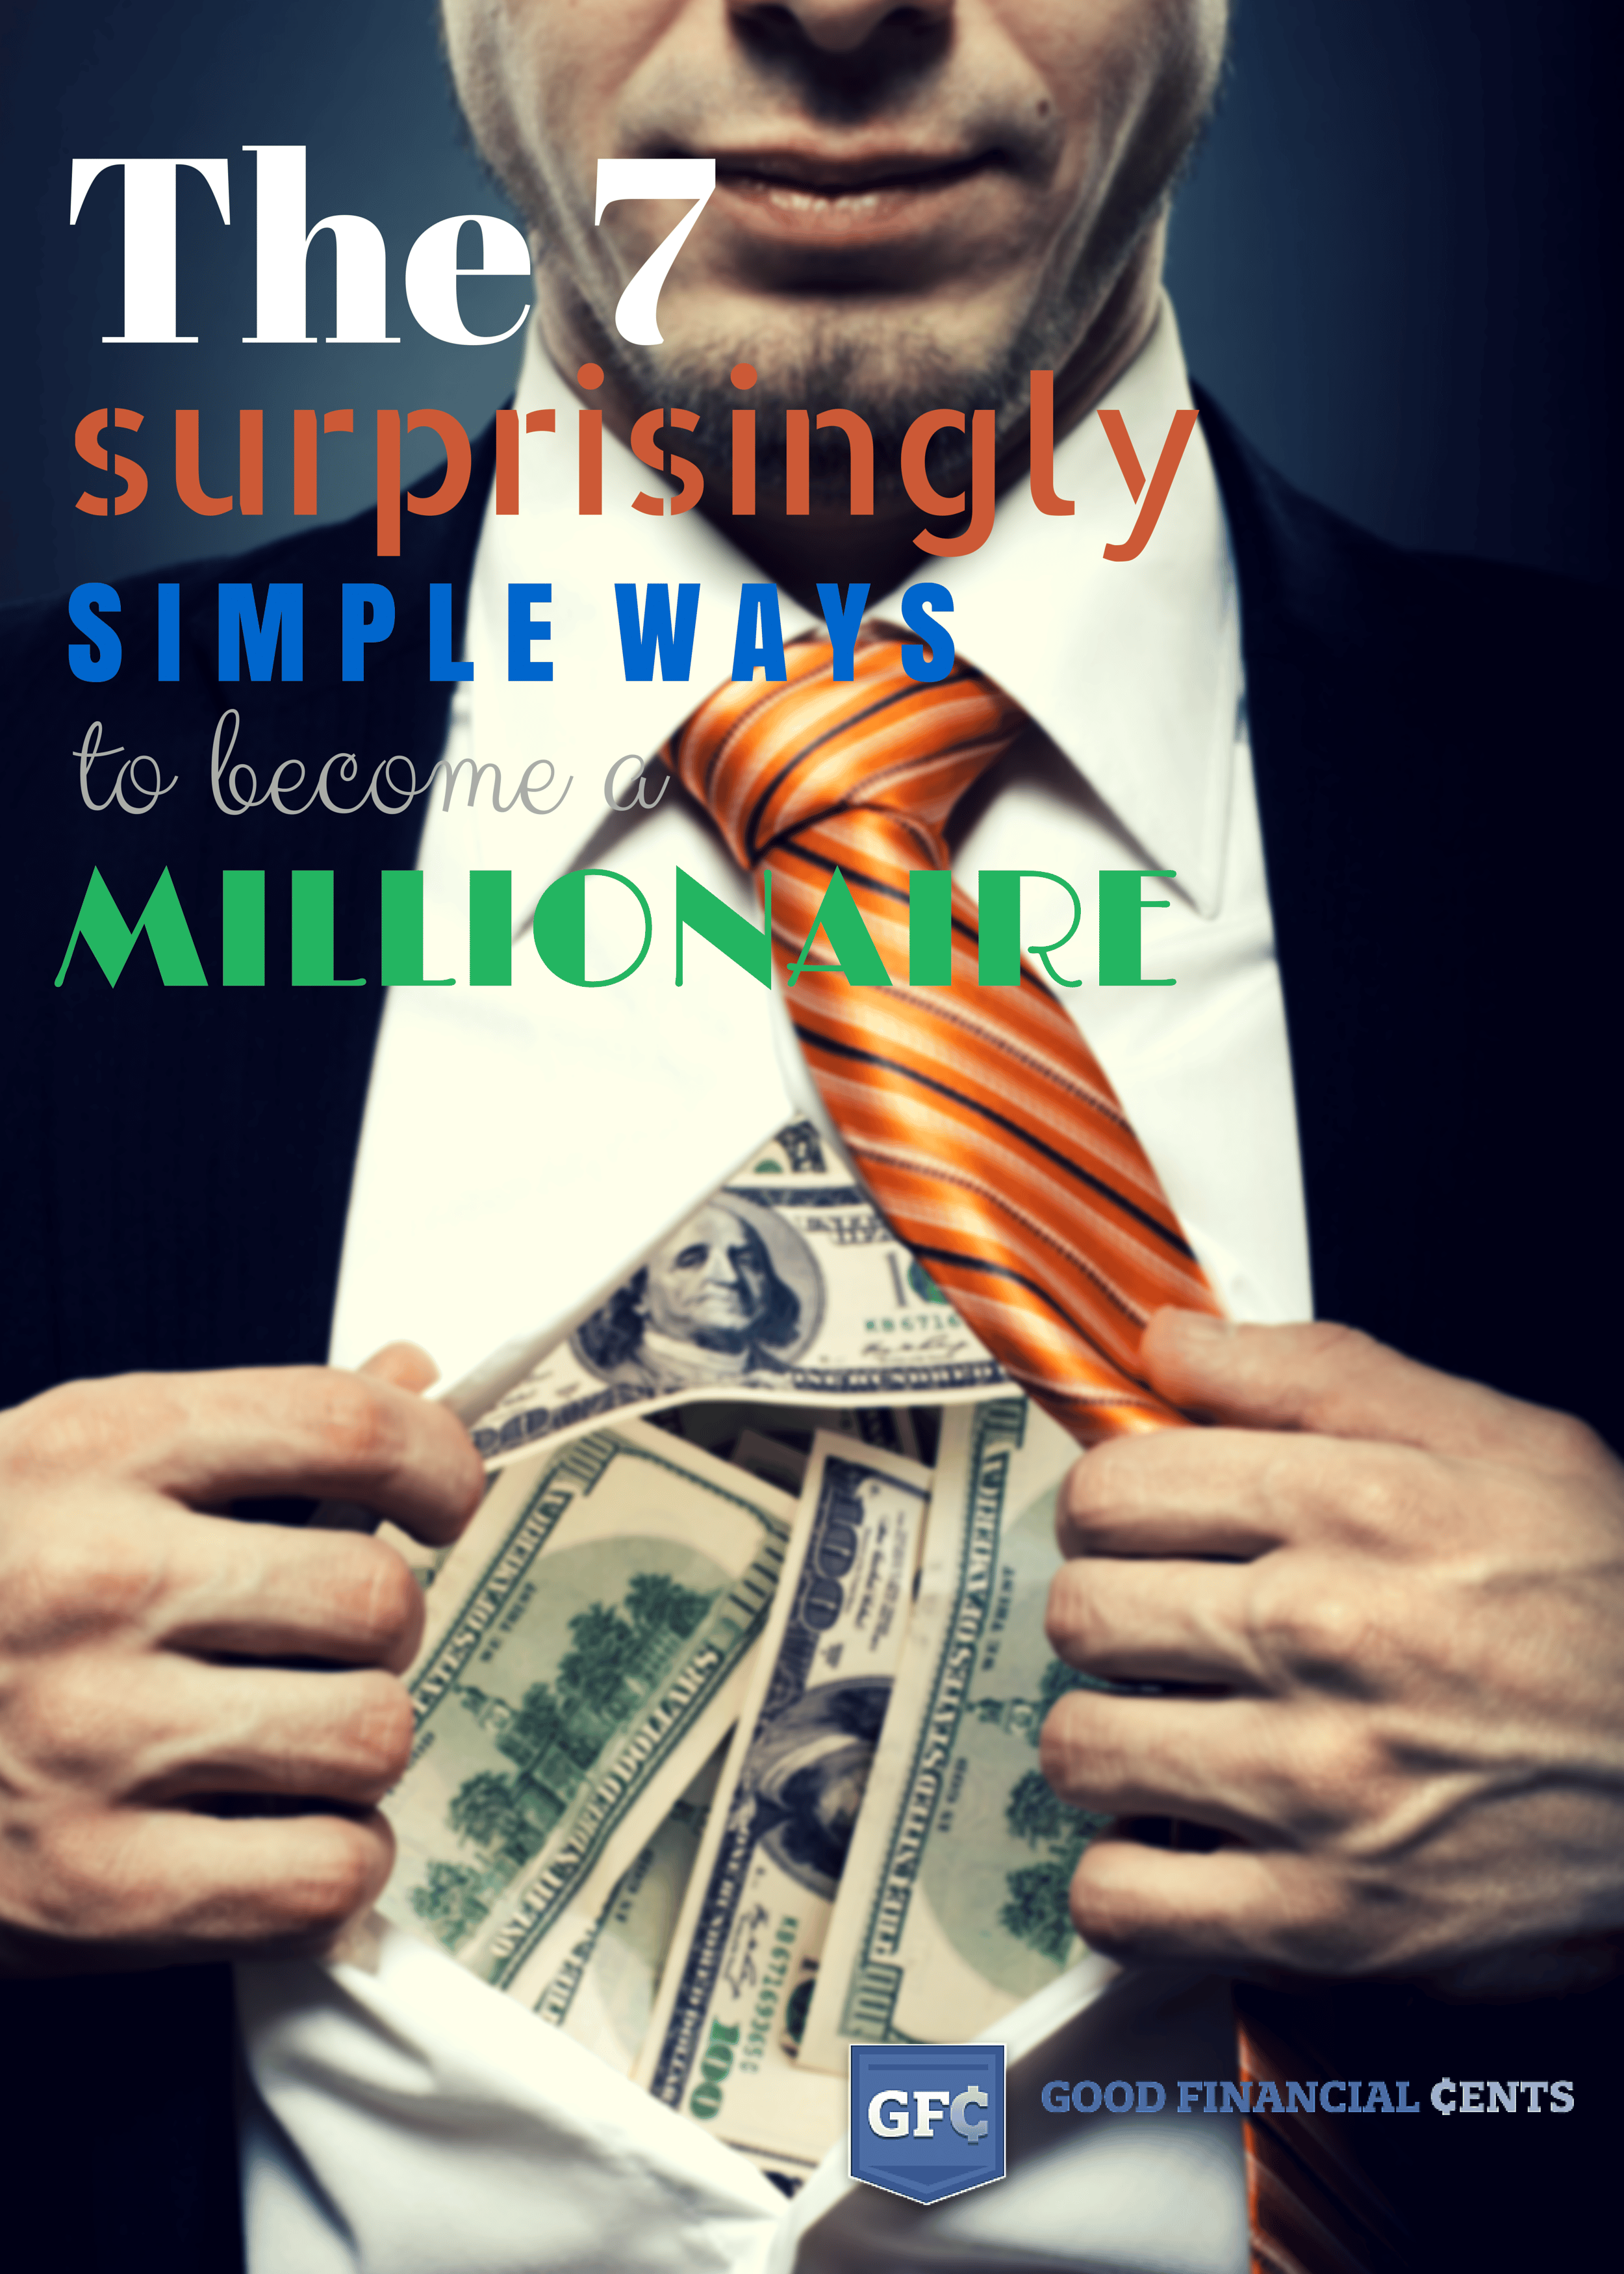 The 7 Surprisingly Simple Ways to a Millionaire